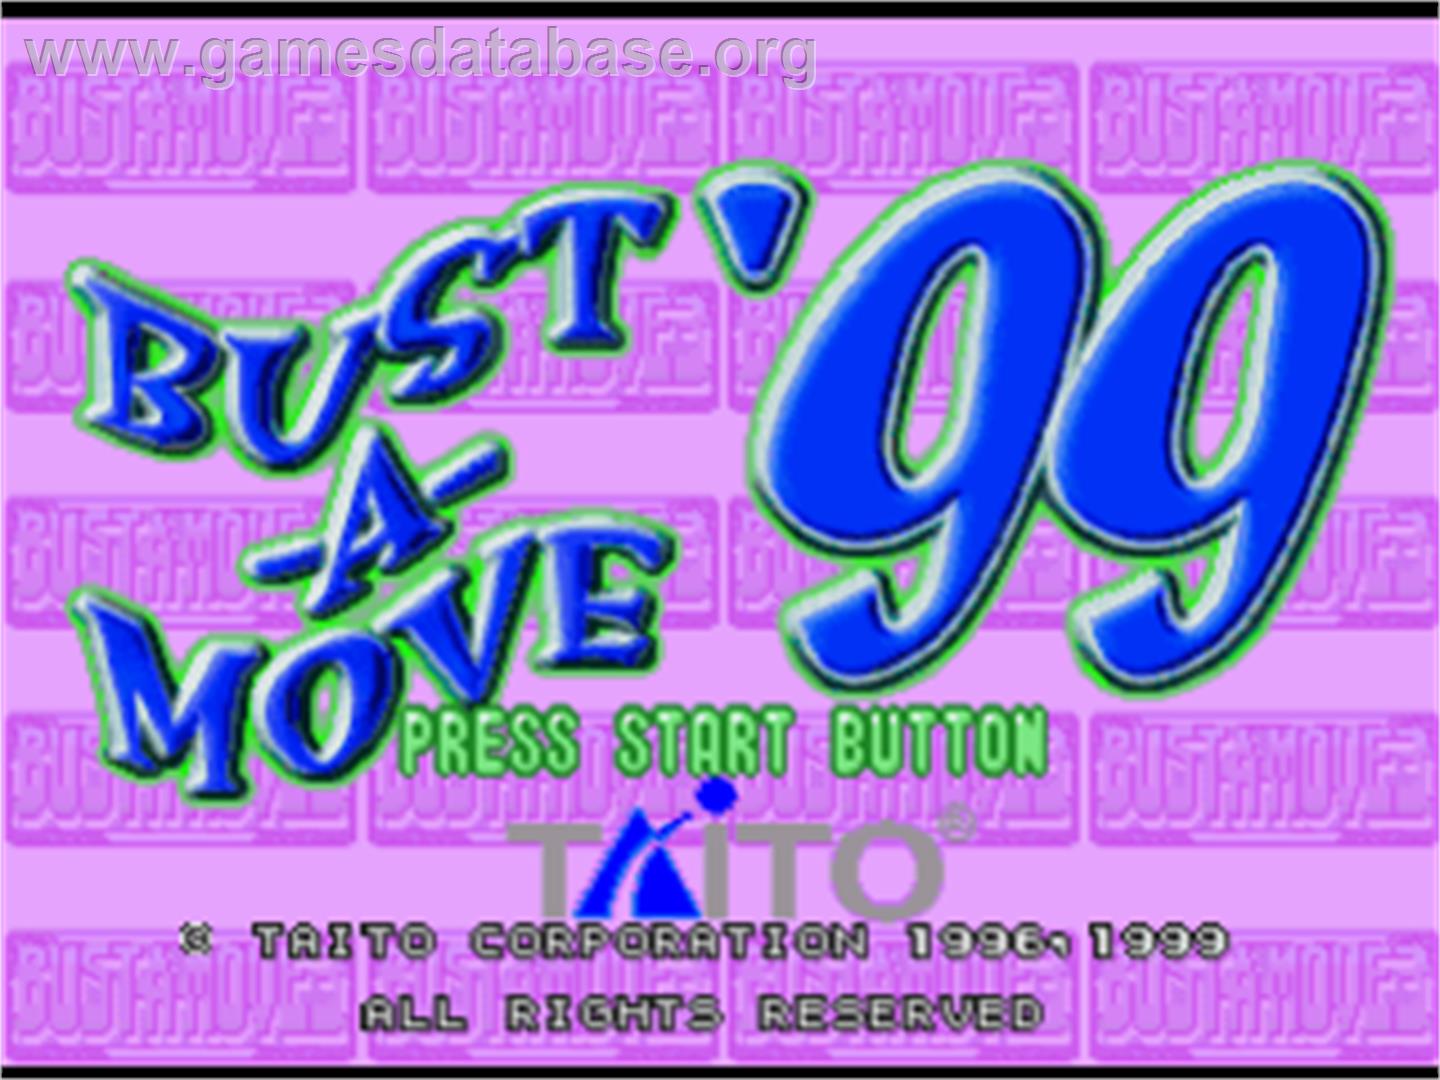 Bust-A-Move '99 - Sony Playstation - Artwork - Title Screen